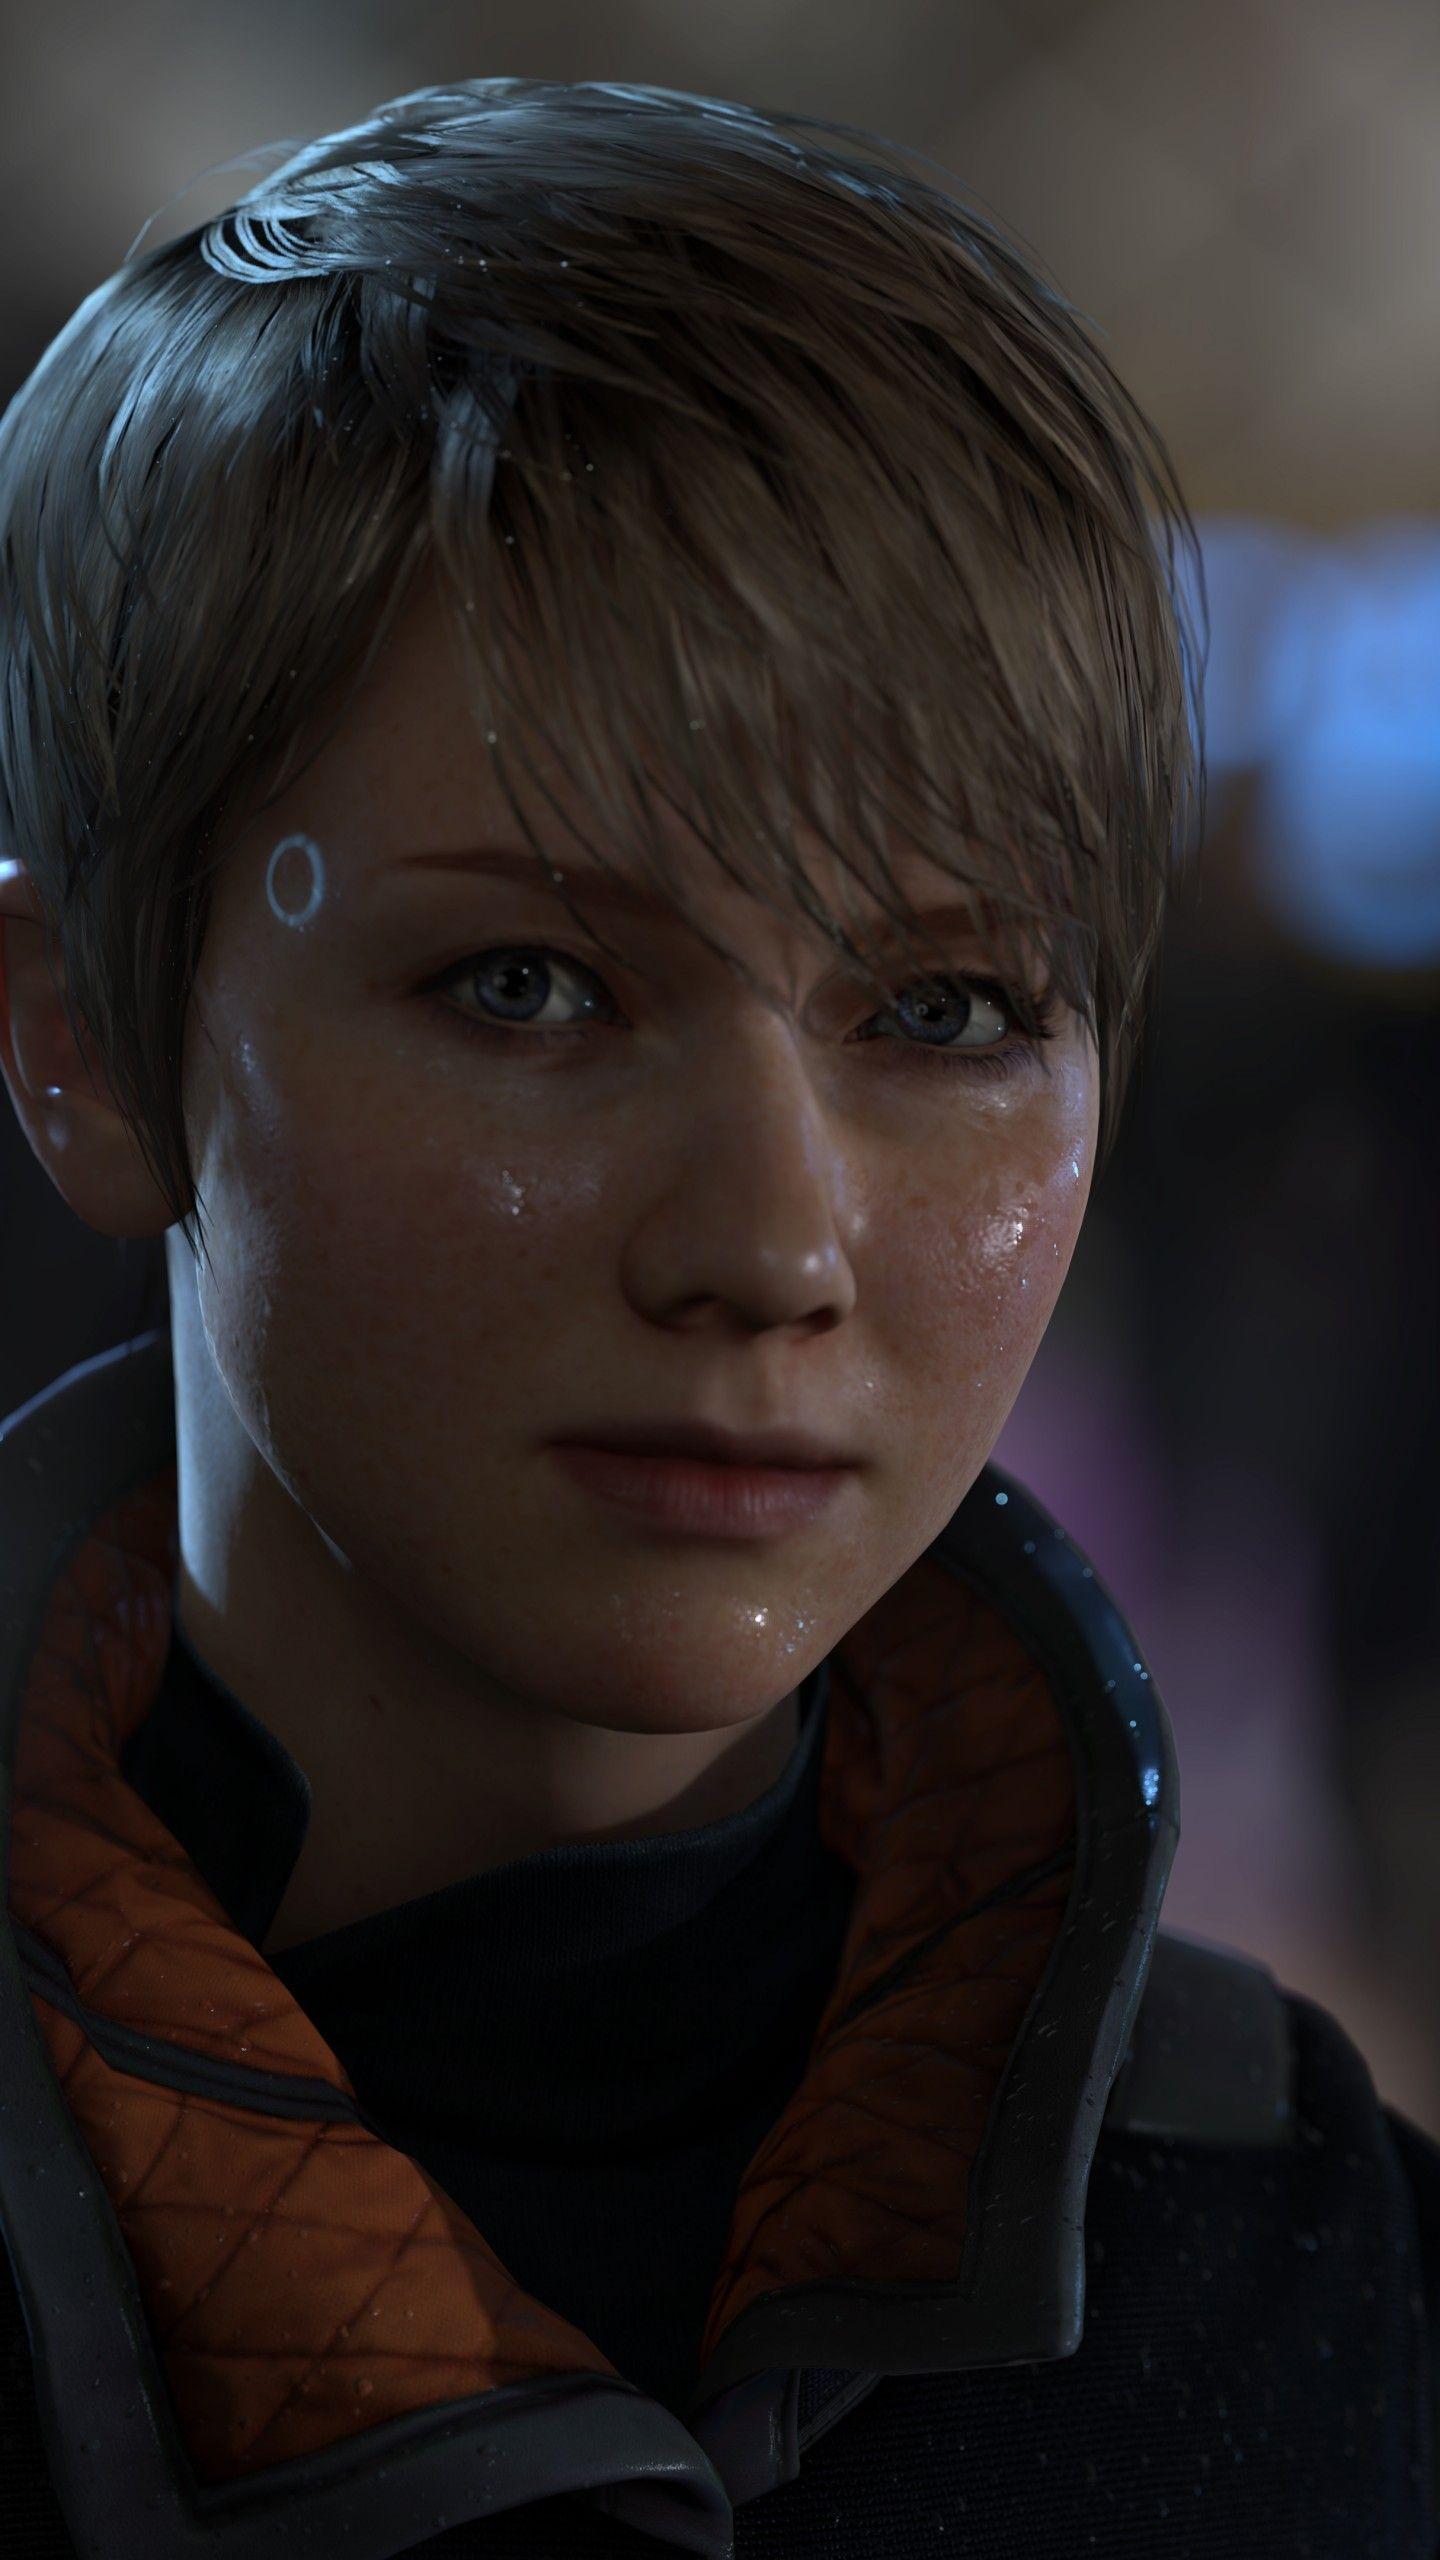 detroit become human pc patch notes